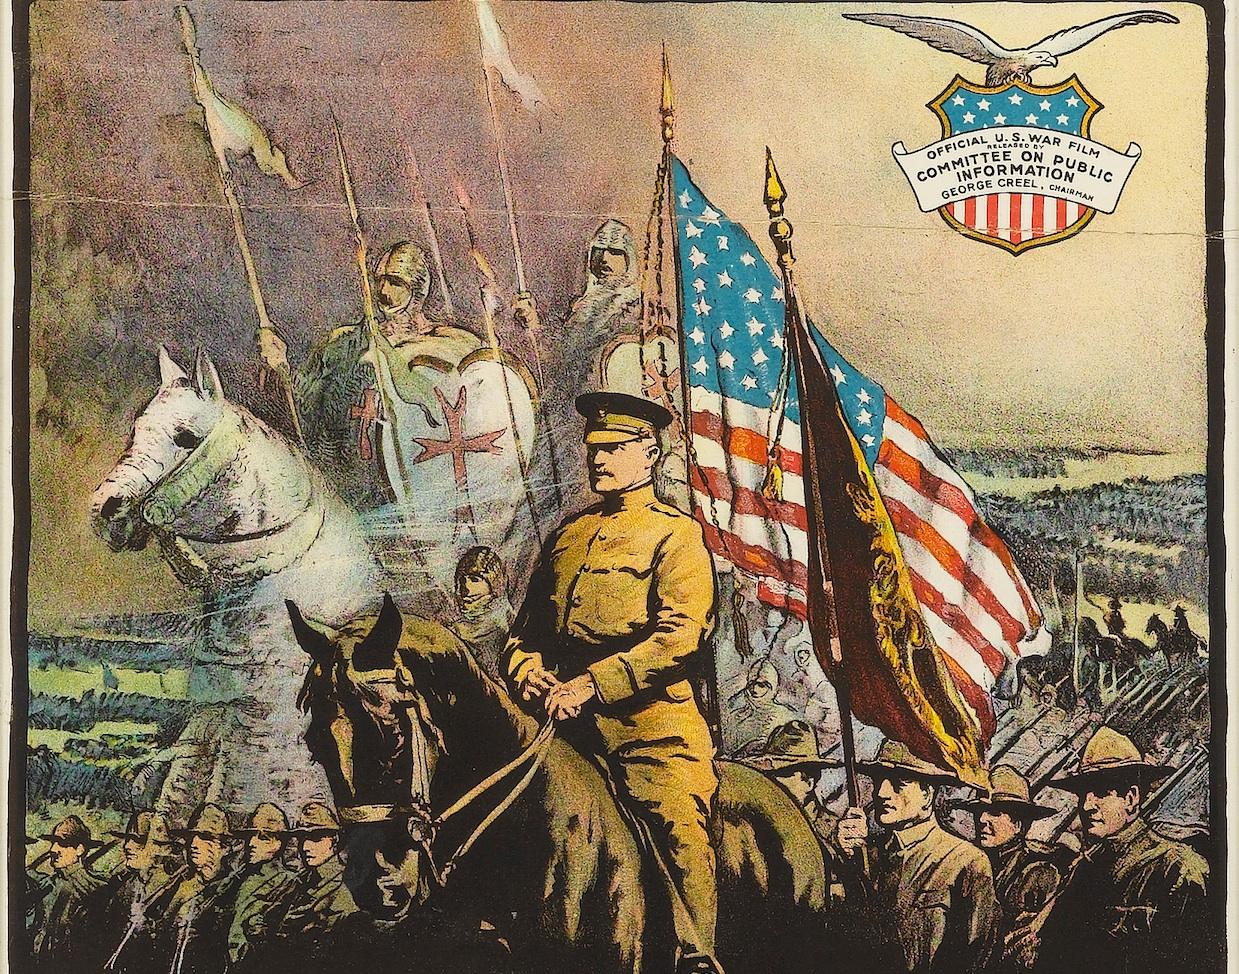 pershing's crusaders poster meaning